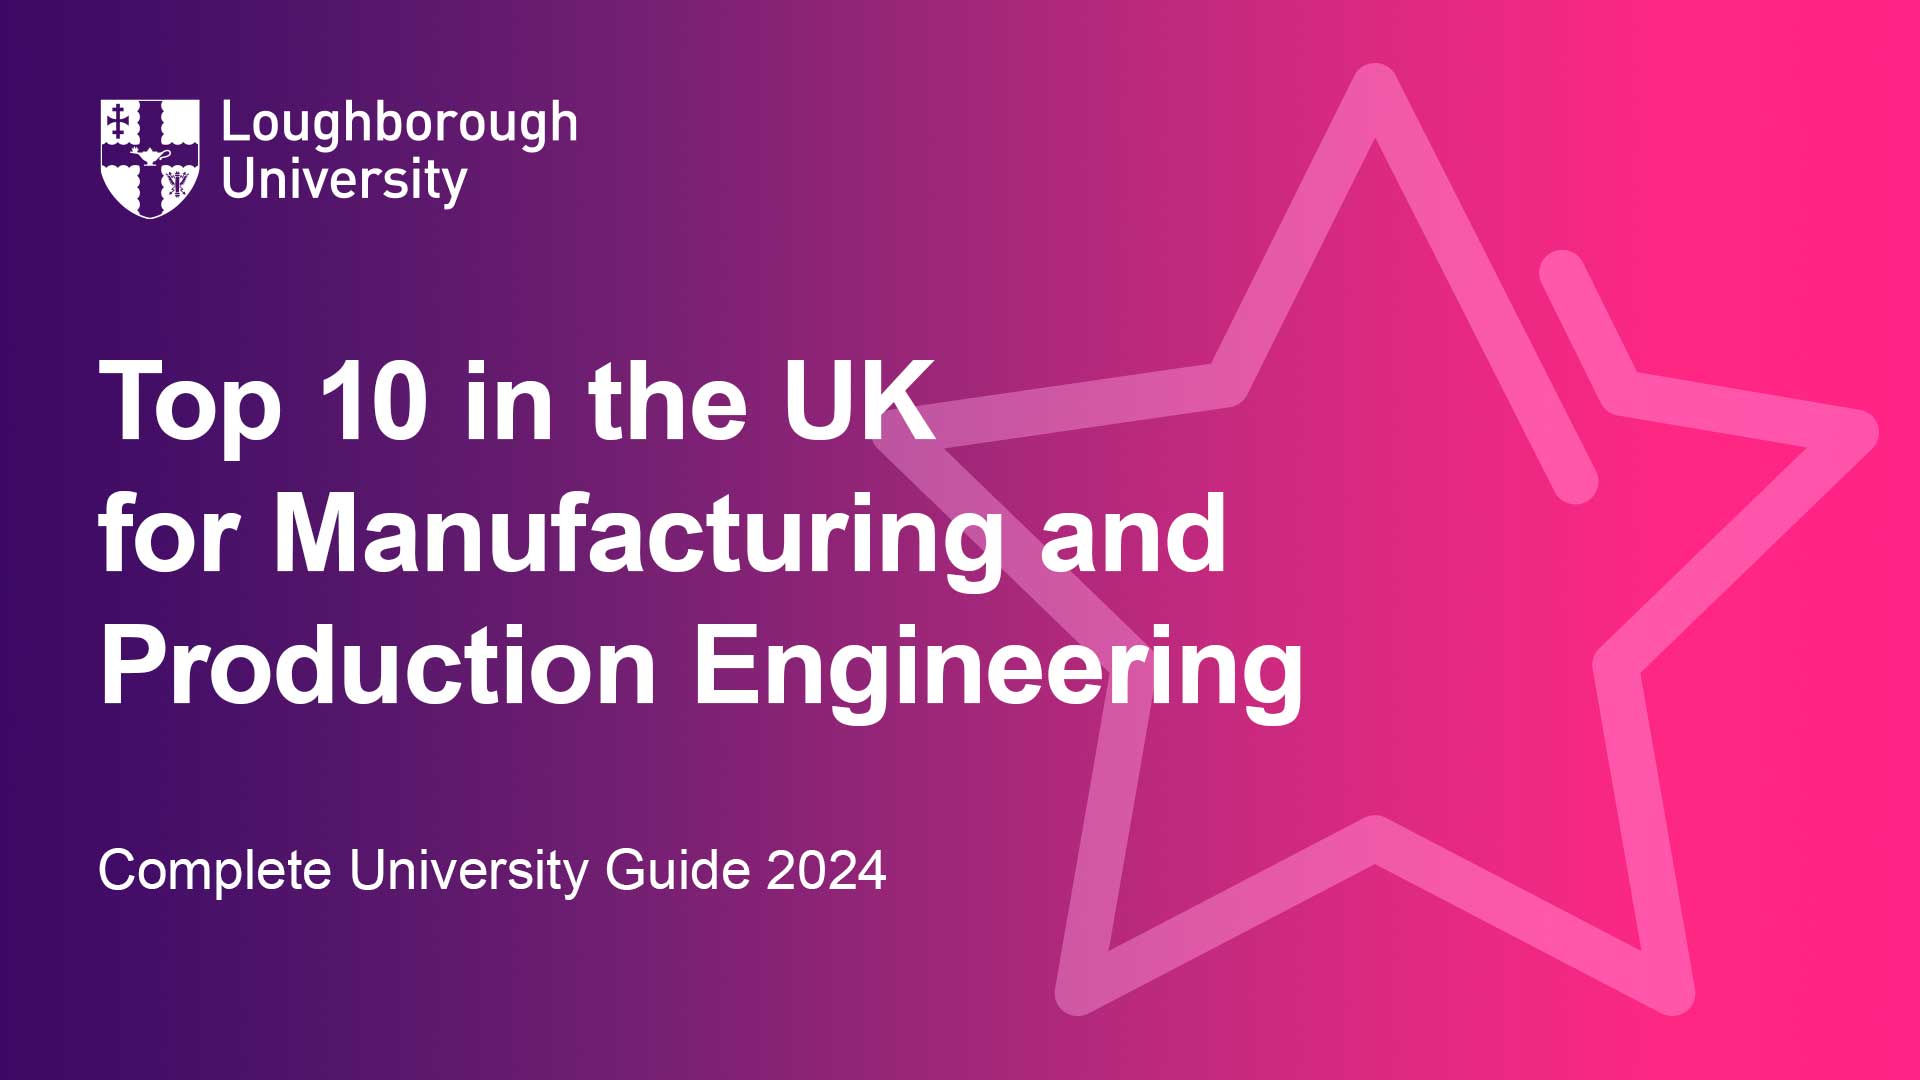 A pink and purple infographic that reads Top 10 in the UK for Manufacturing and Production Engineering (ranked 6th) in the Complete University Guide 2024.